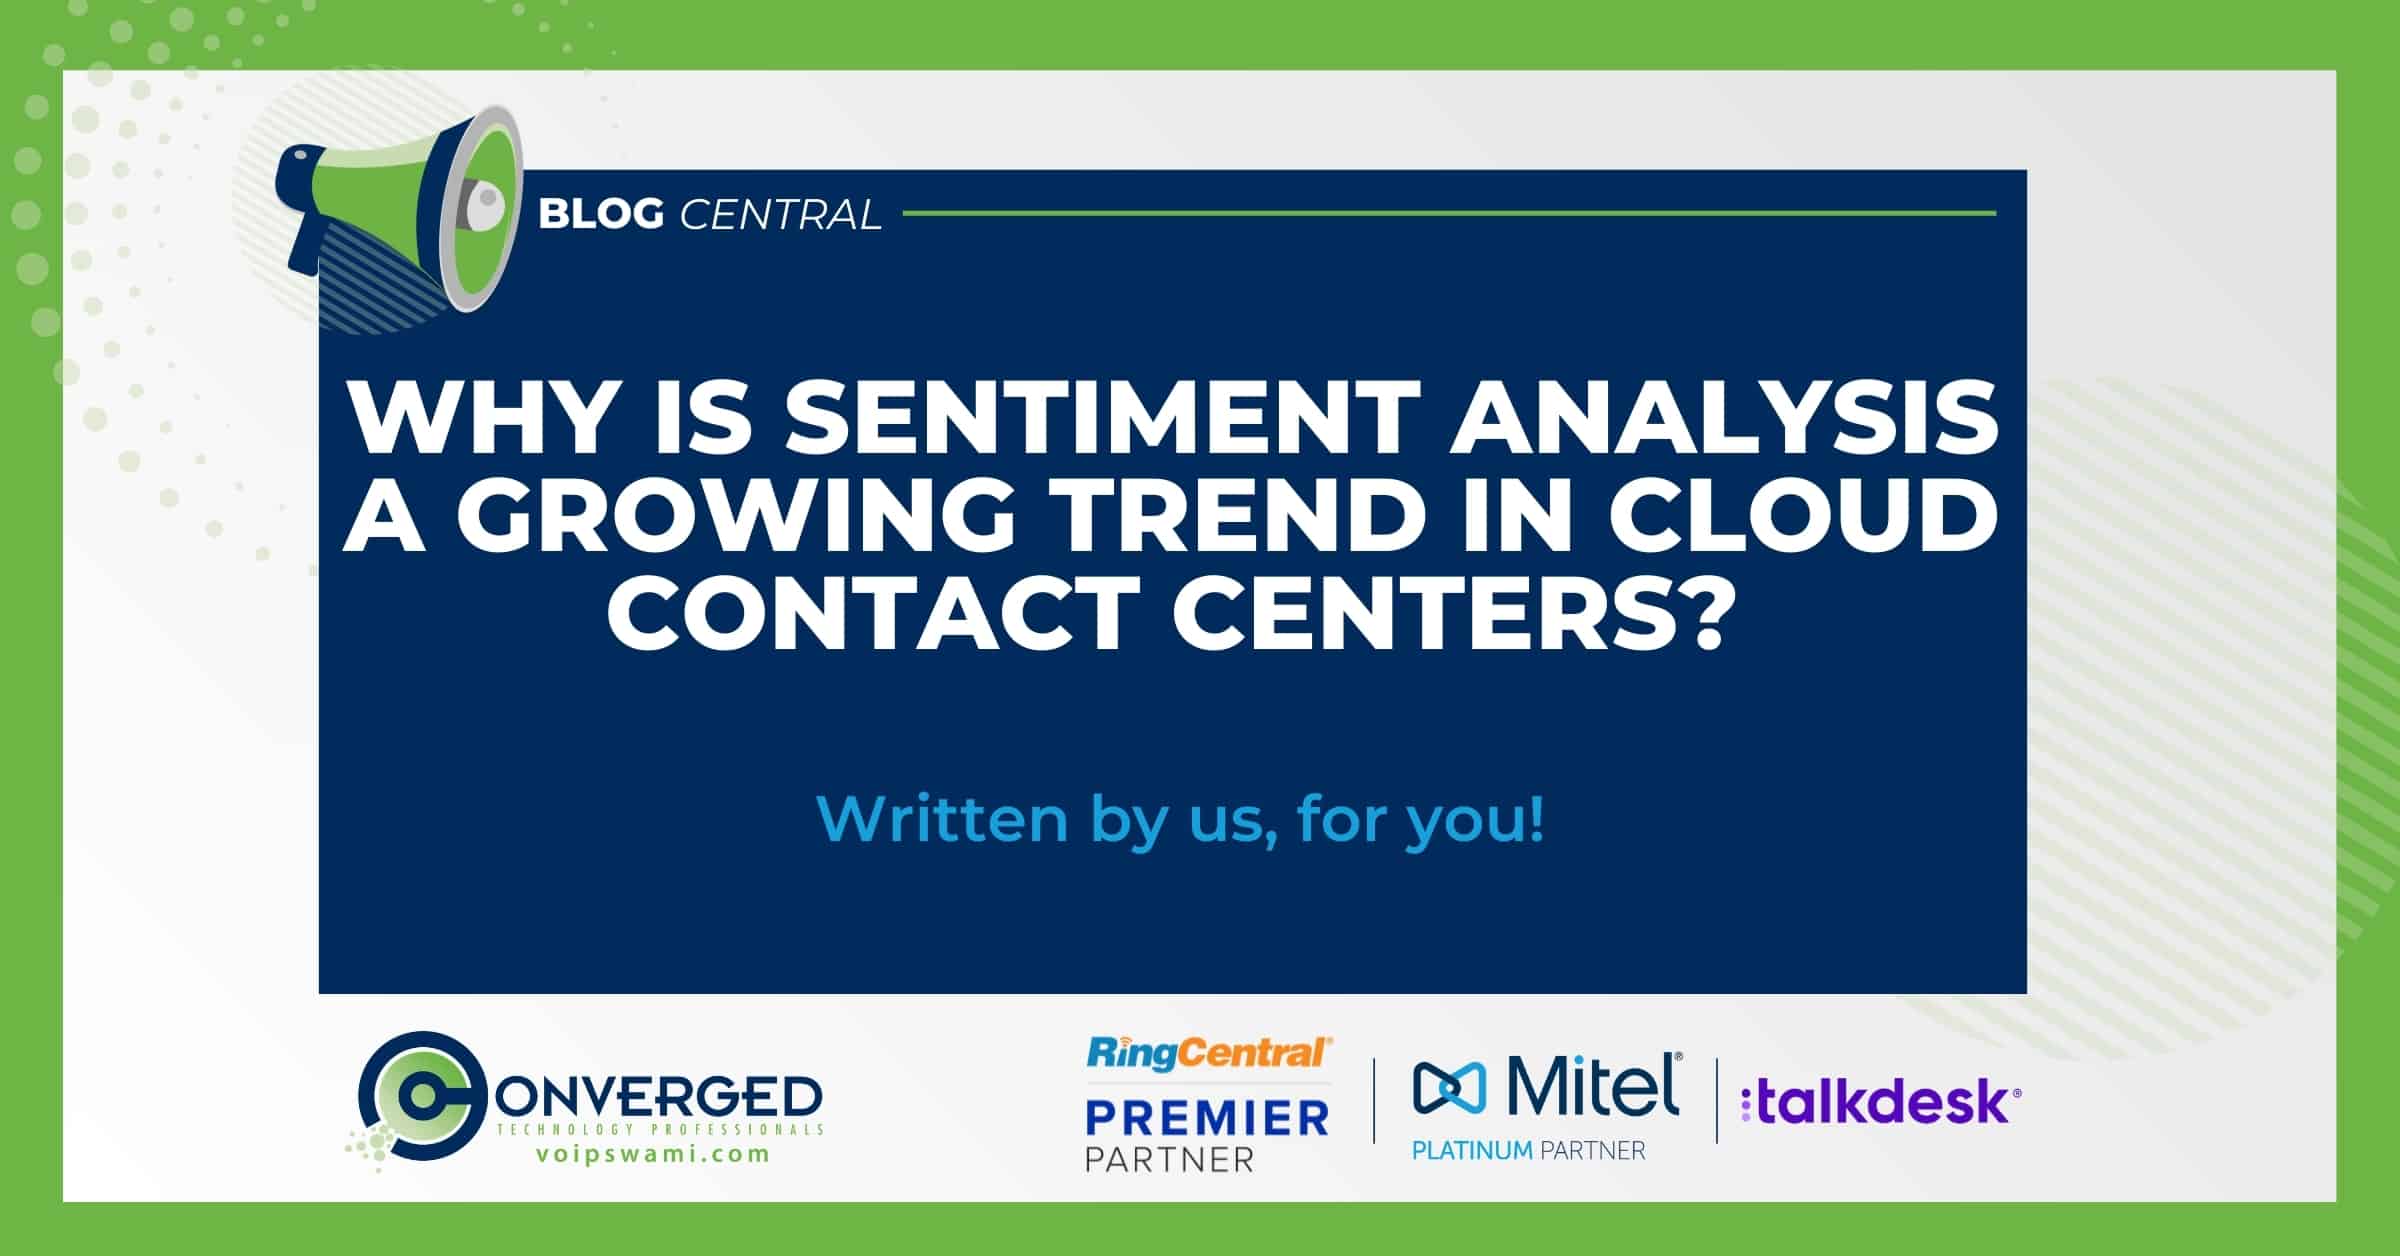 Why is Sentiment Analysis a Growing Trend in Cloud Contact Centers